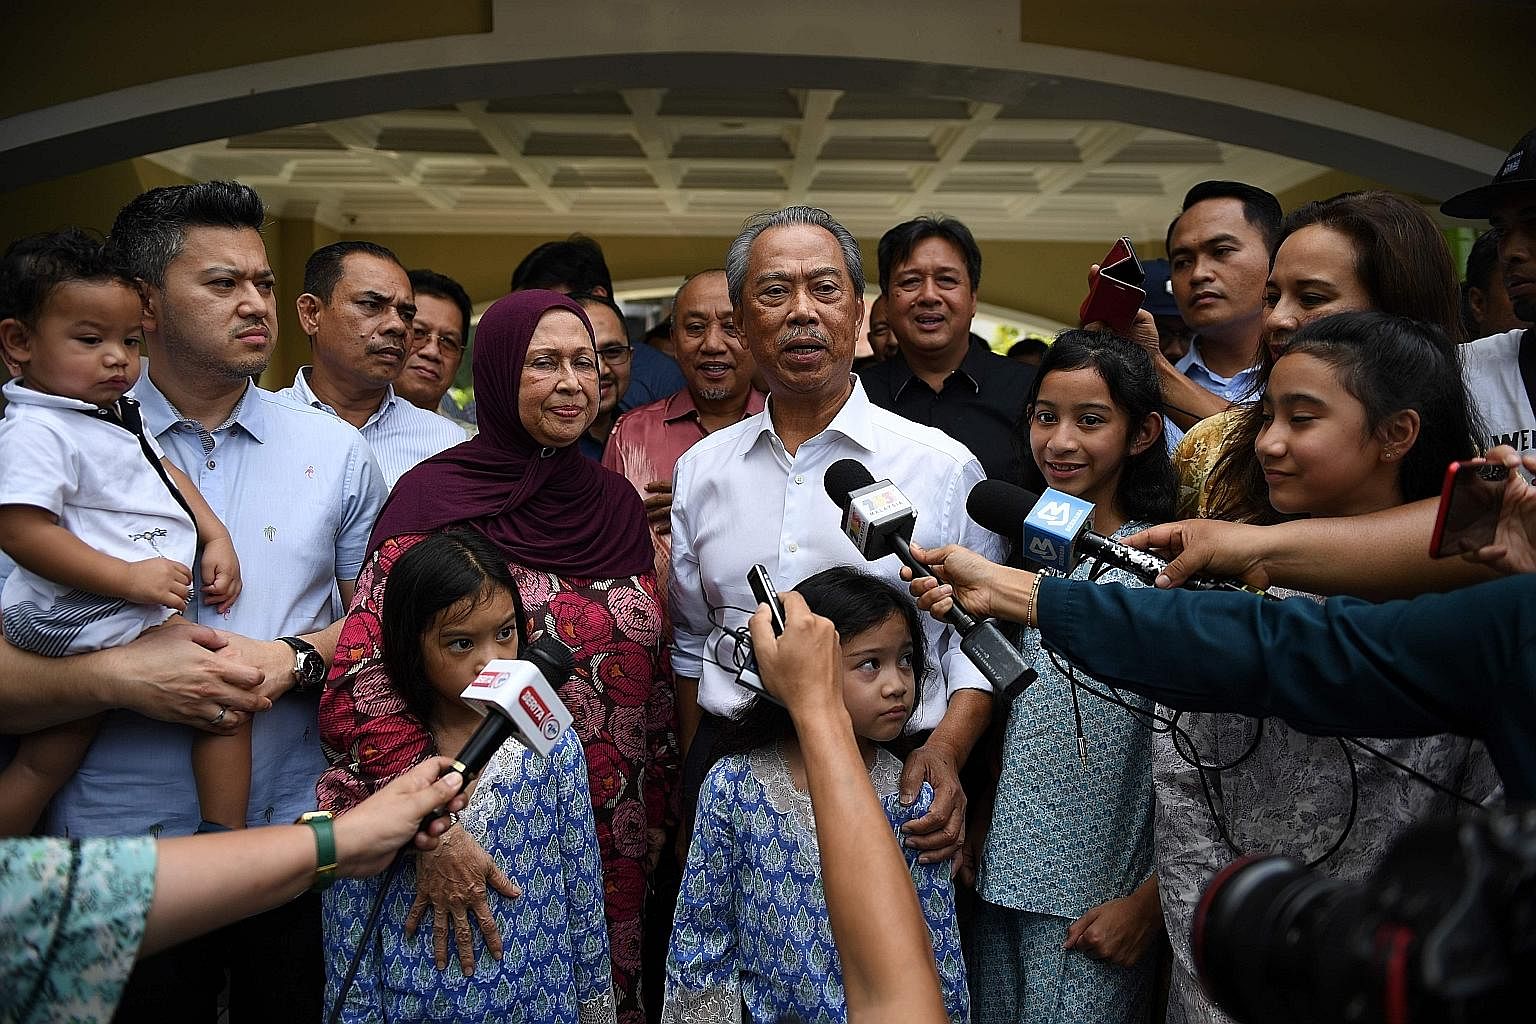 In a news conference last Wednesday, interim Prime Minister Mahathir Mohamad announced his wish to form a non-partisan unity government. PHOTO: REUTERS